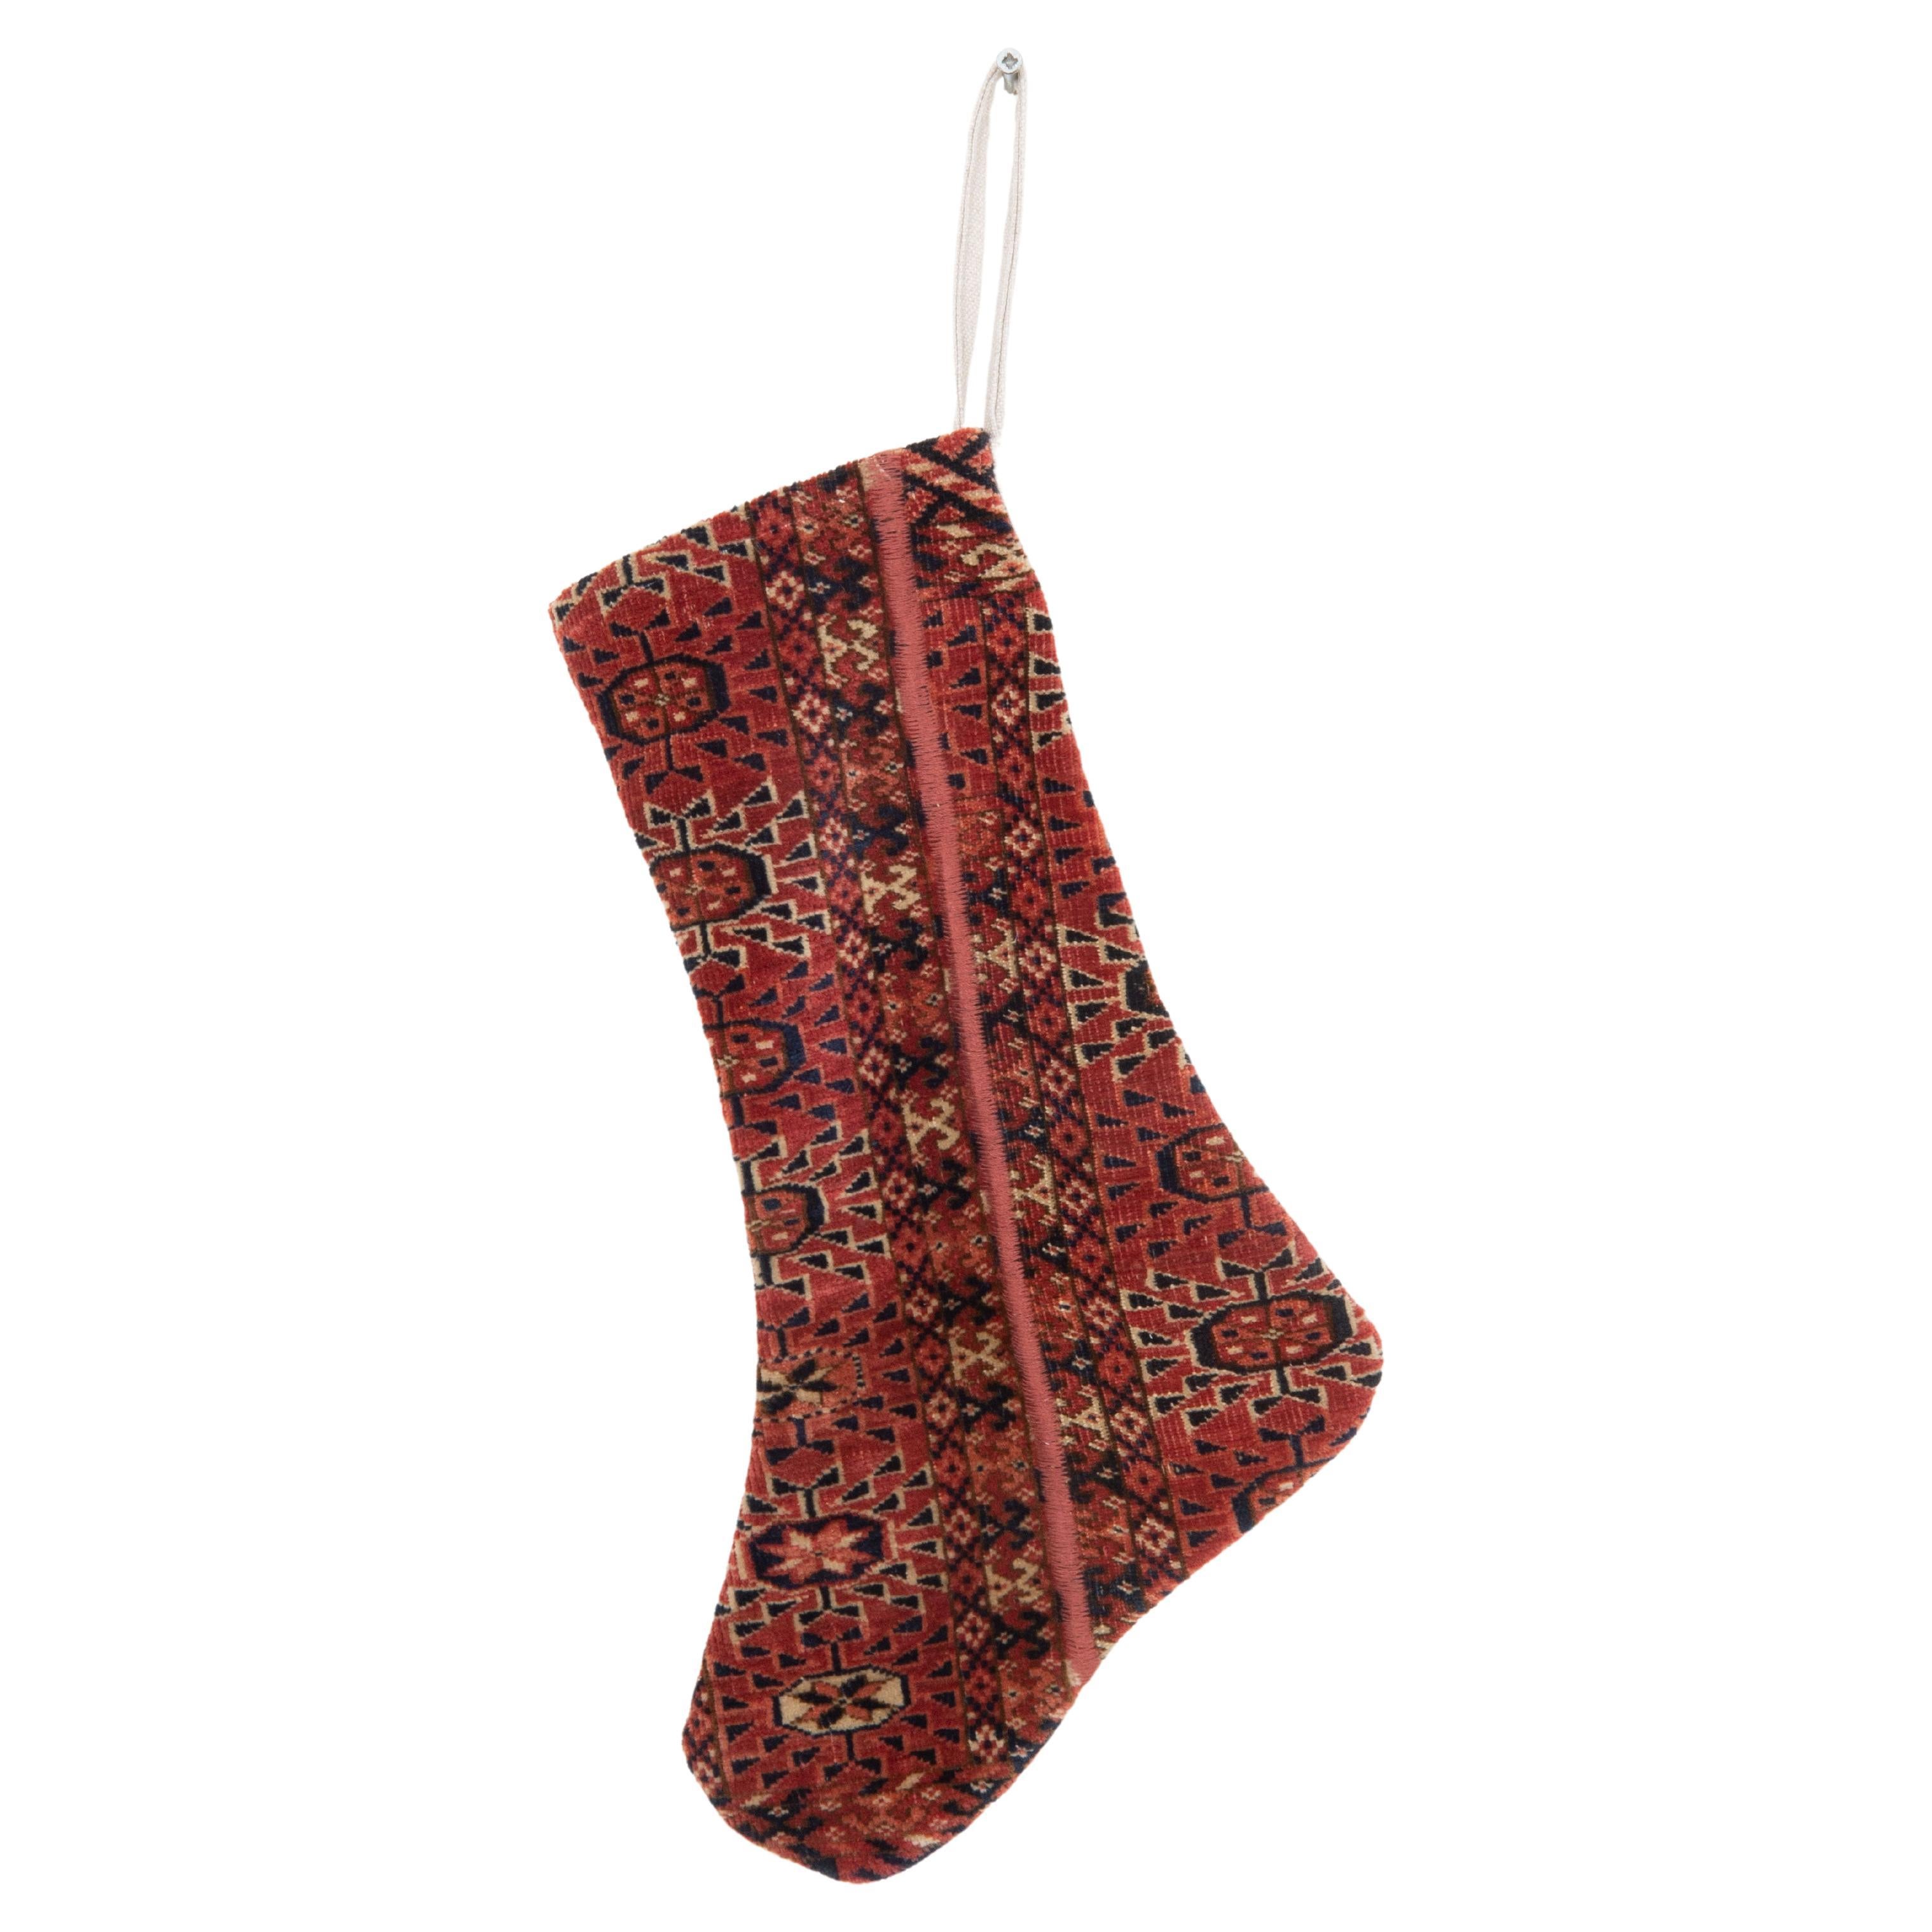 Christmas Stocking Made from Turkmrn Rug Fragments